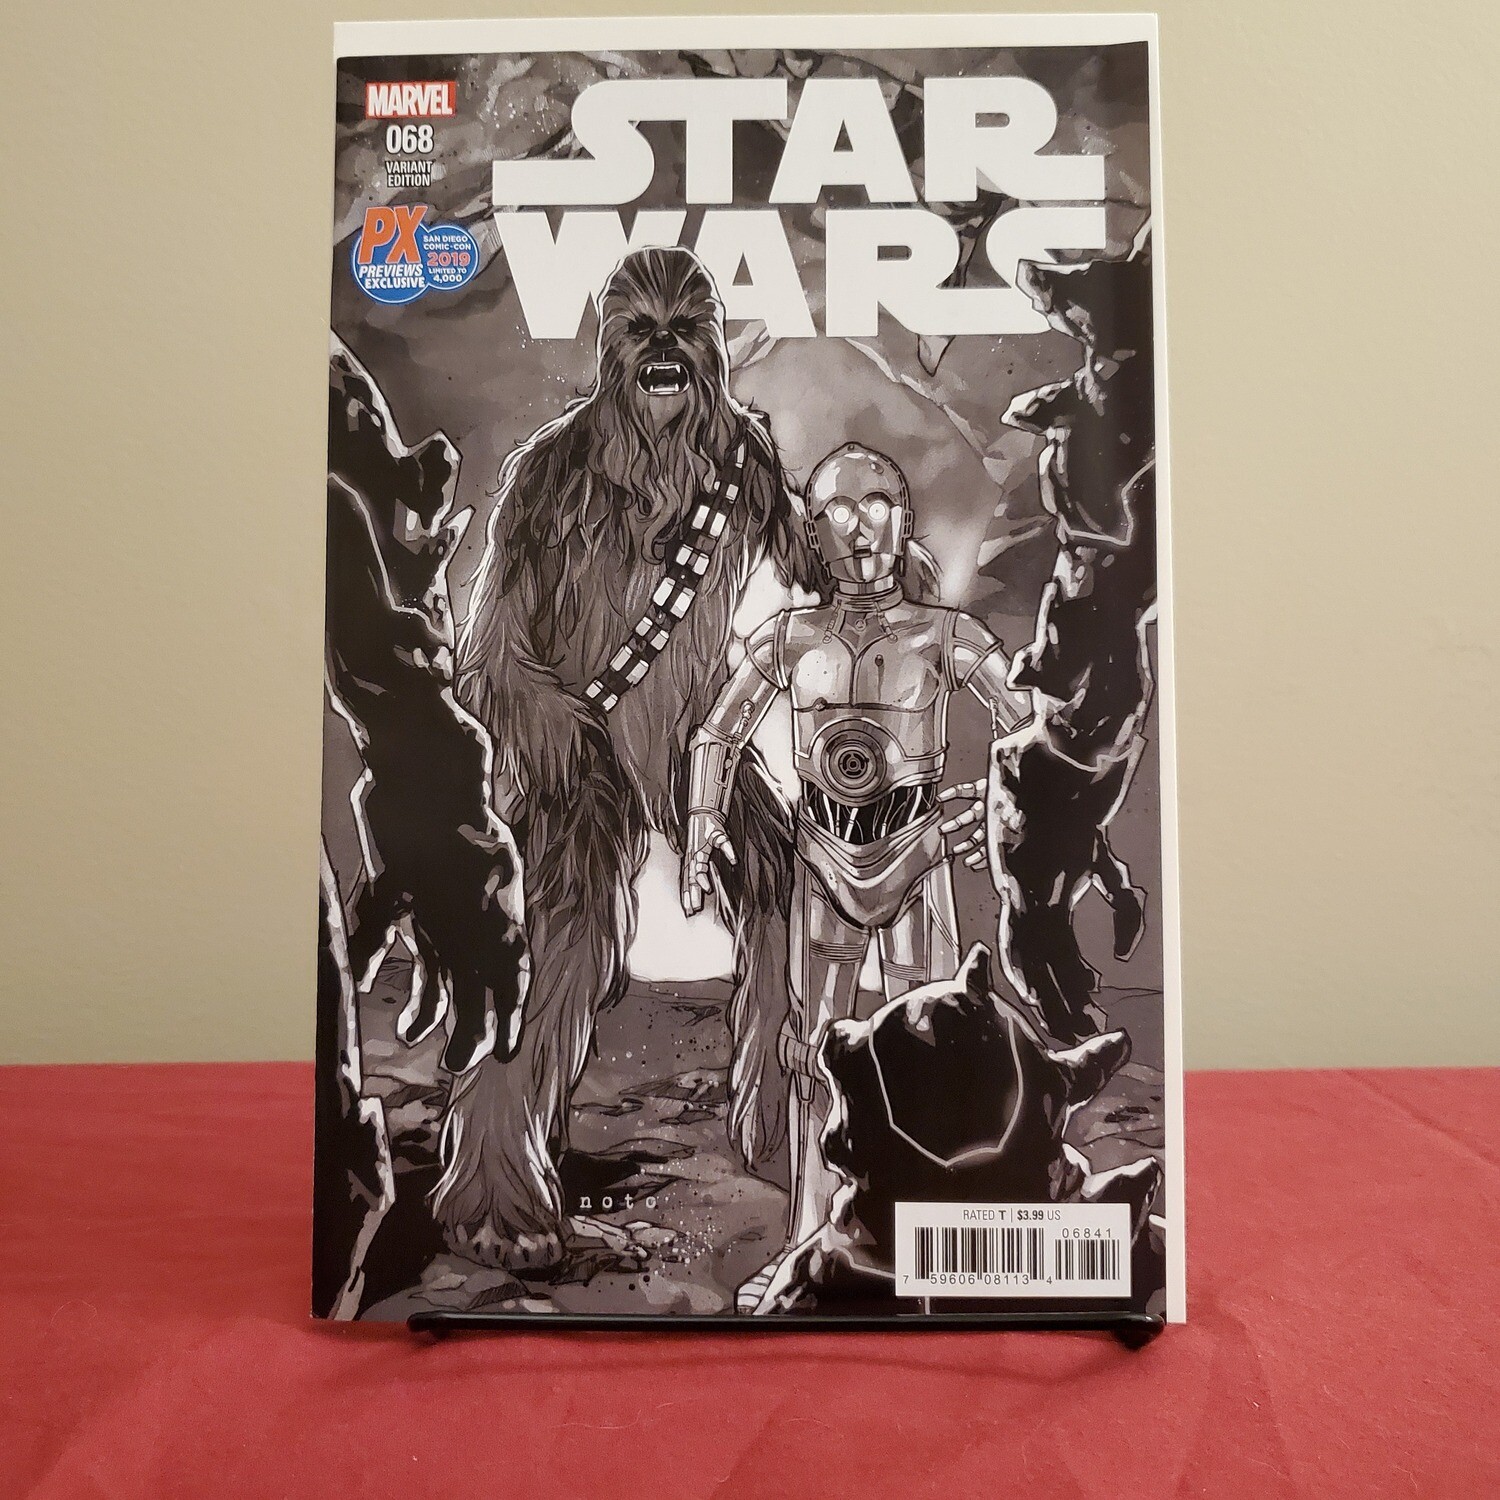 Star Wars #68 NM Variant Cover Limited to 4000 copies